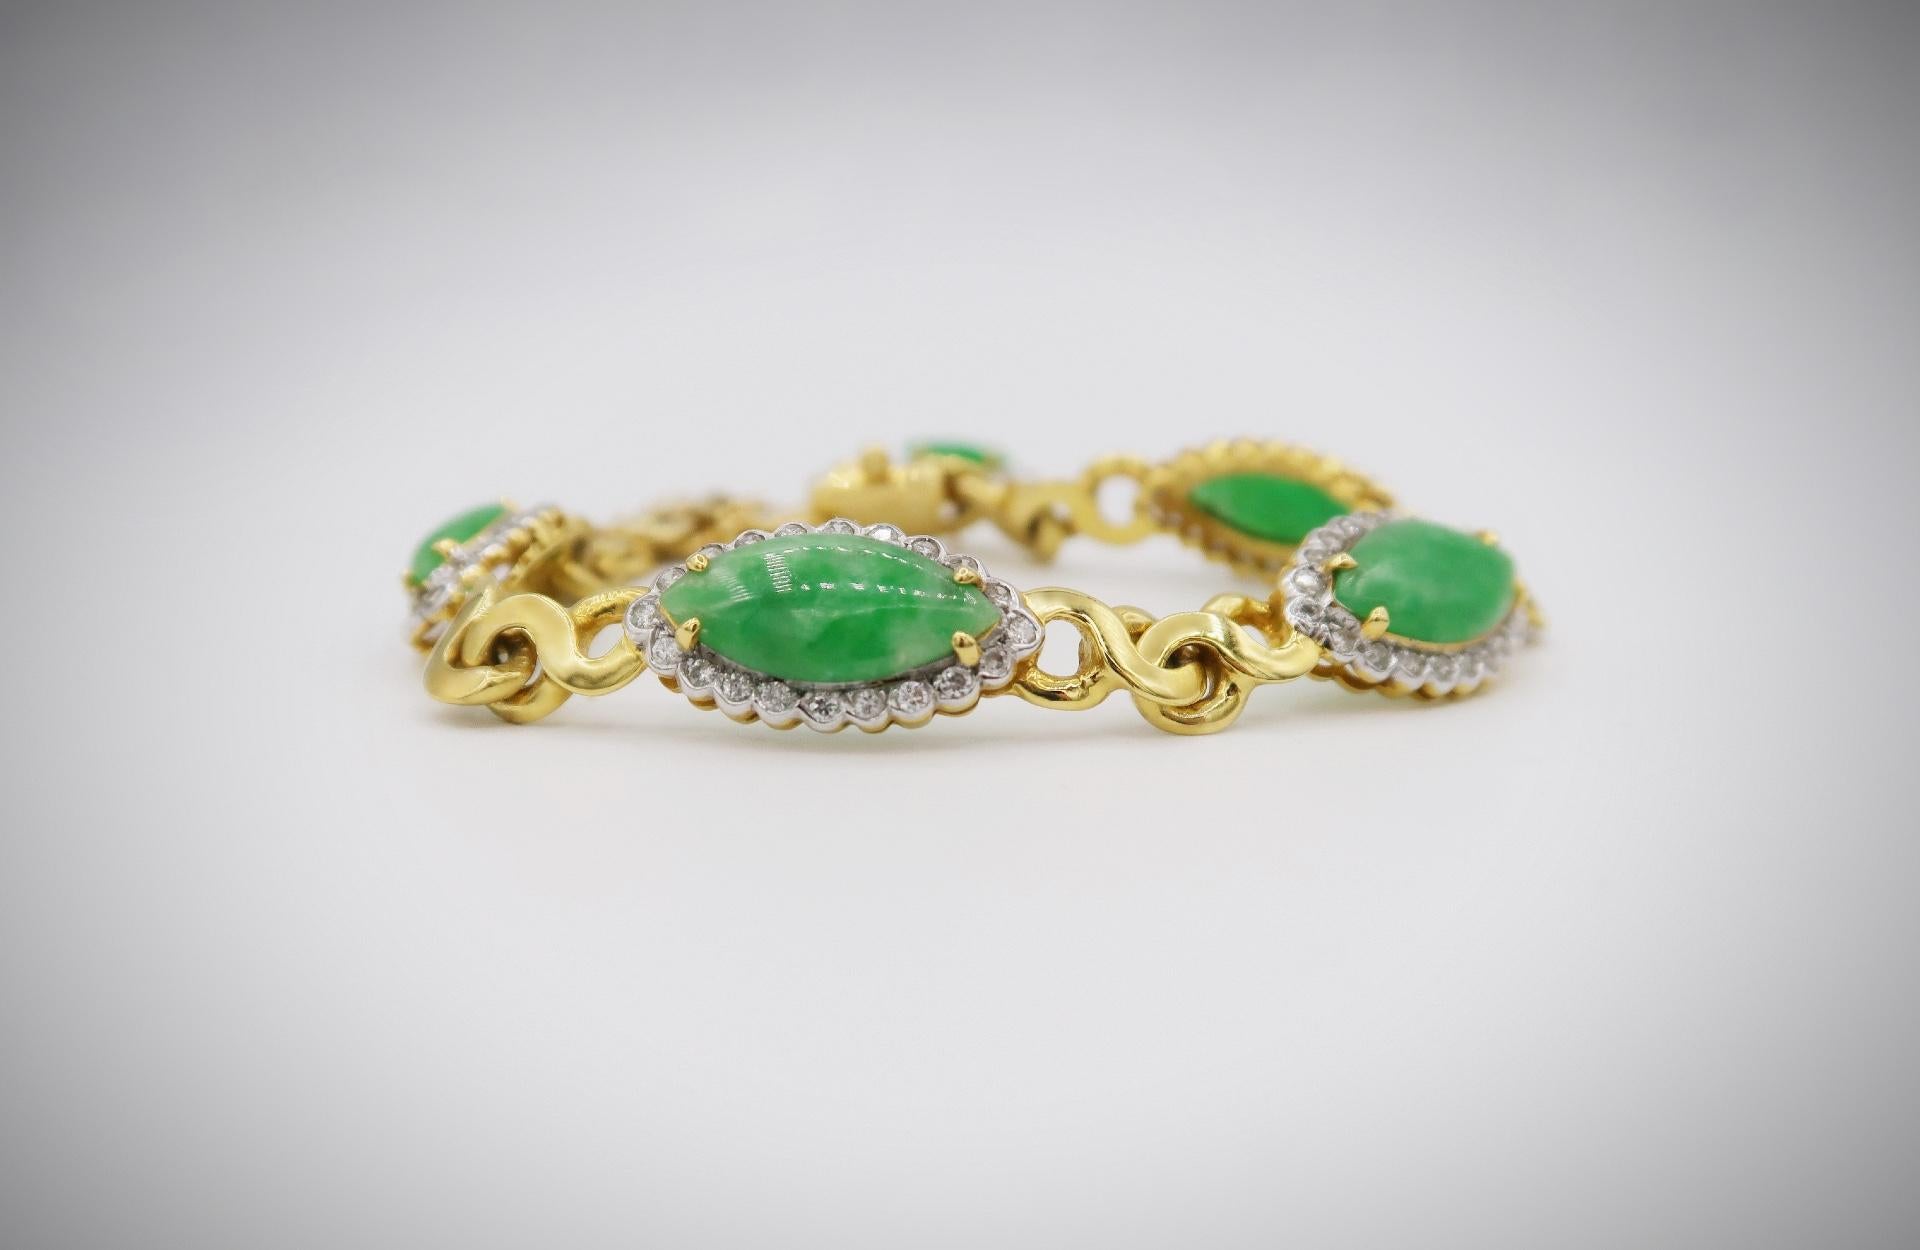 Cabochon Marquise Apple Green Untreated Old Mine Burmese Jadeite Jade Bracelet in 22K Gold with Diamond Scalloped Edge.

Diamond: Round Brillant, 2.82 ct
Gold: 22K Gold, 20.0 g

Length: 7 inches